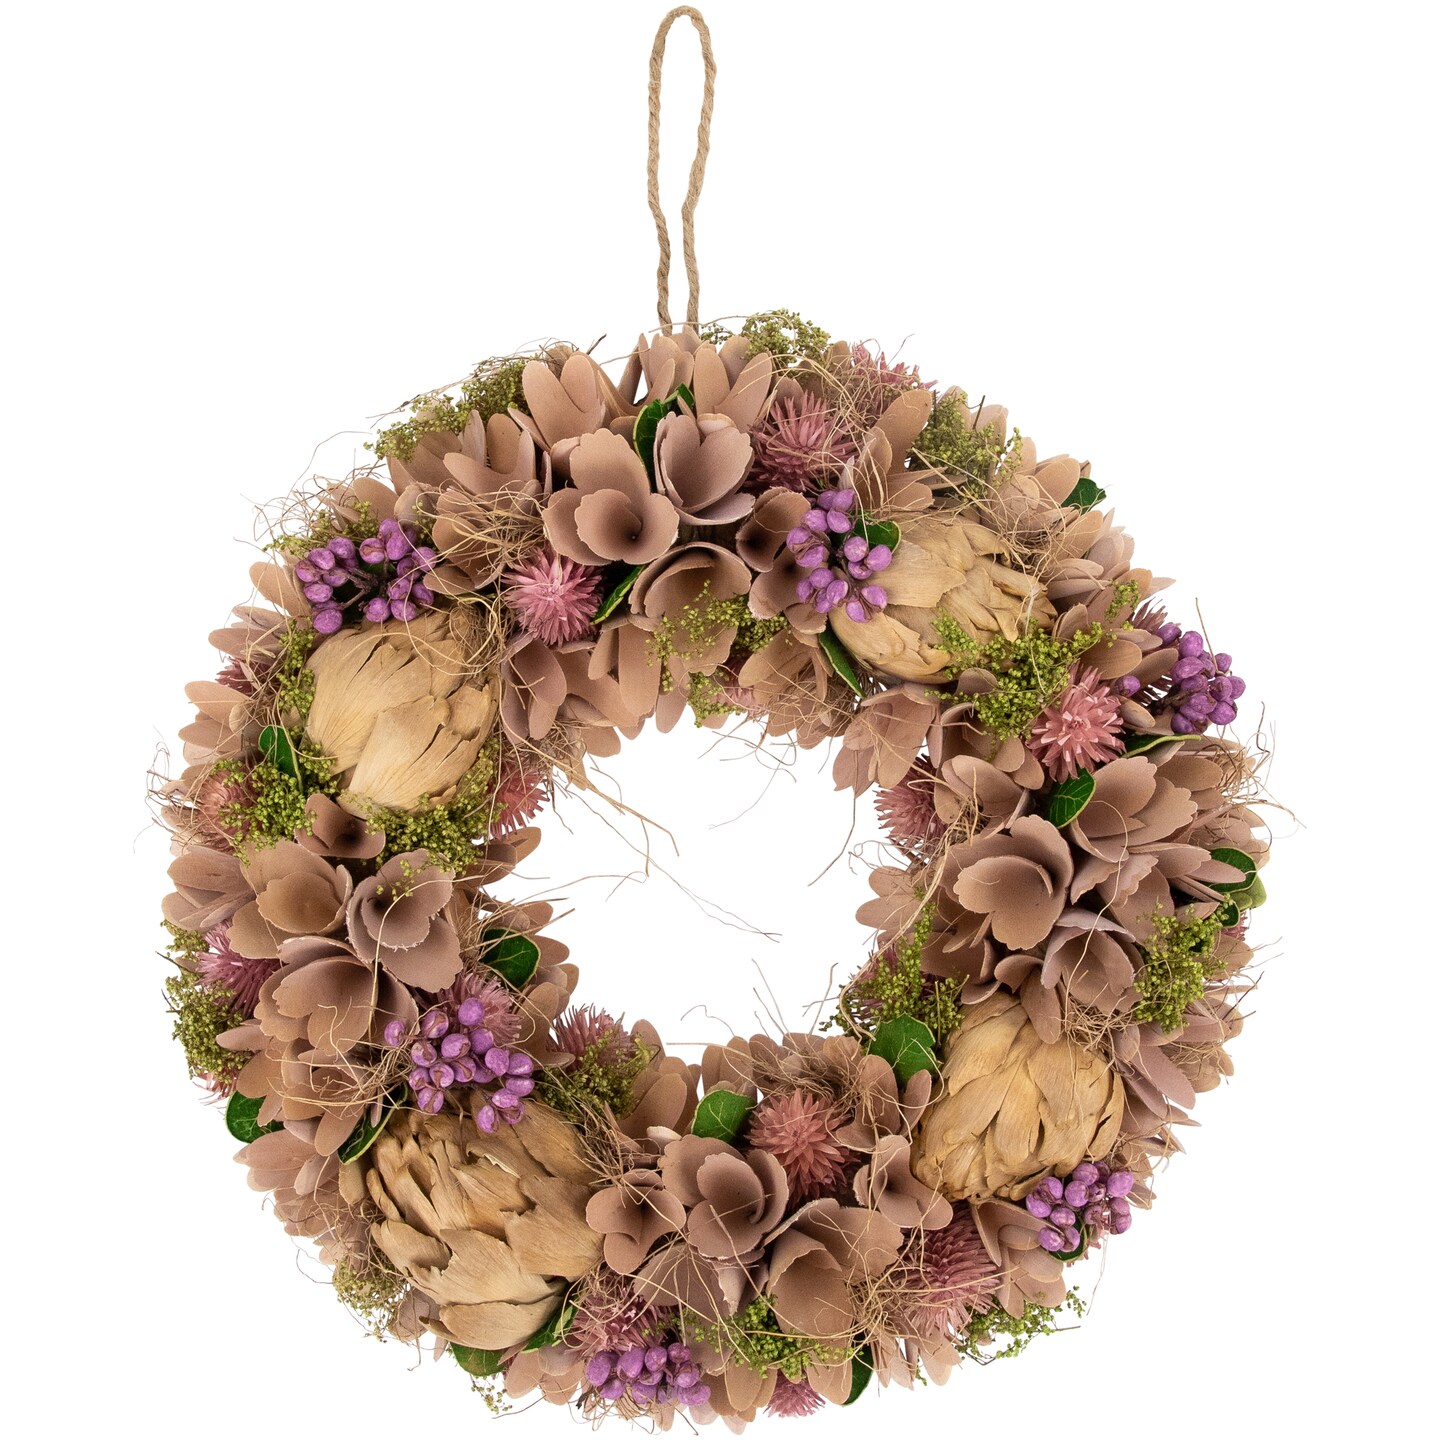 All Preserved Wreaths & Florals